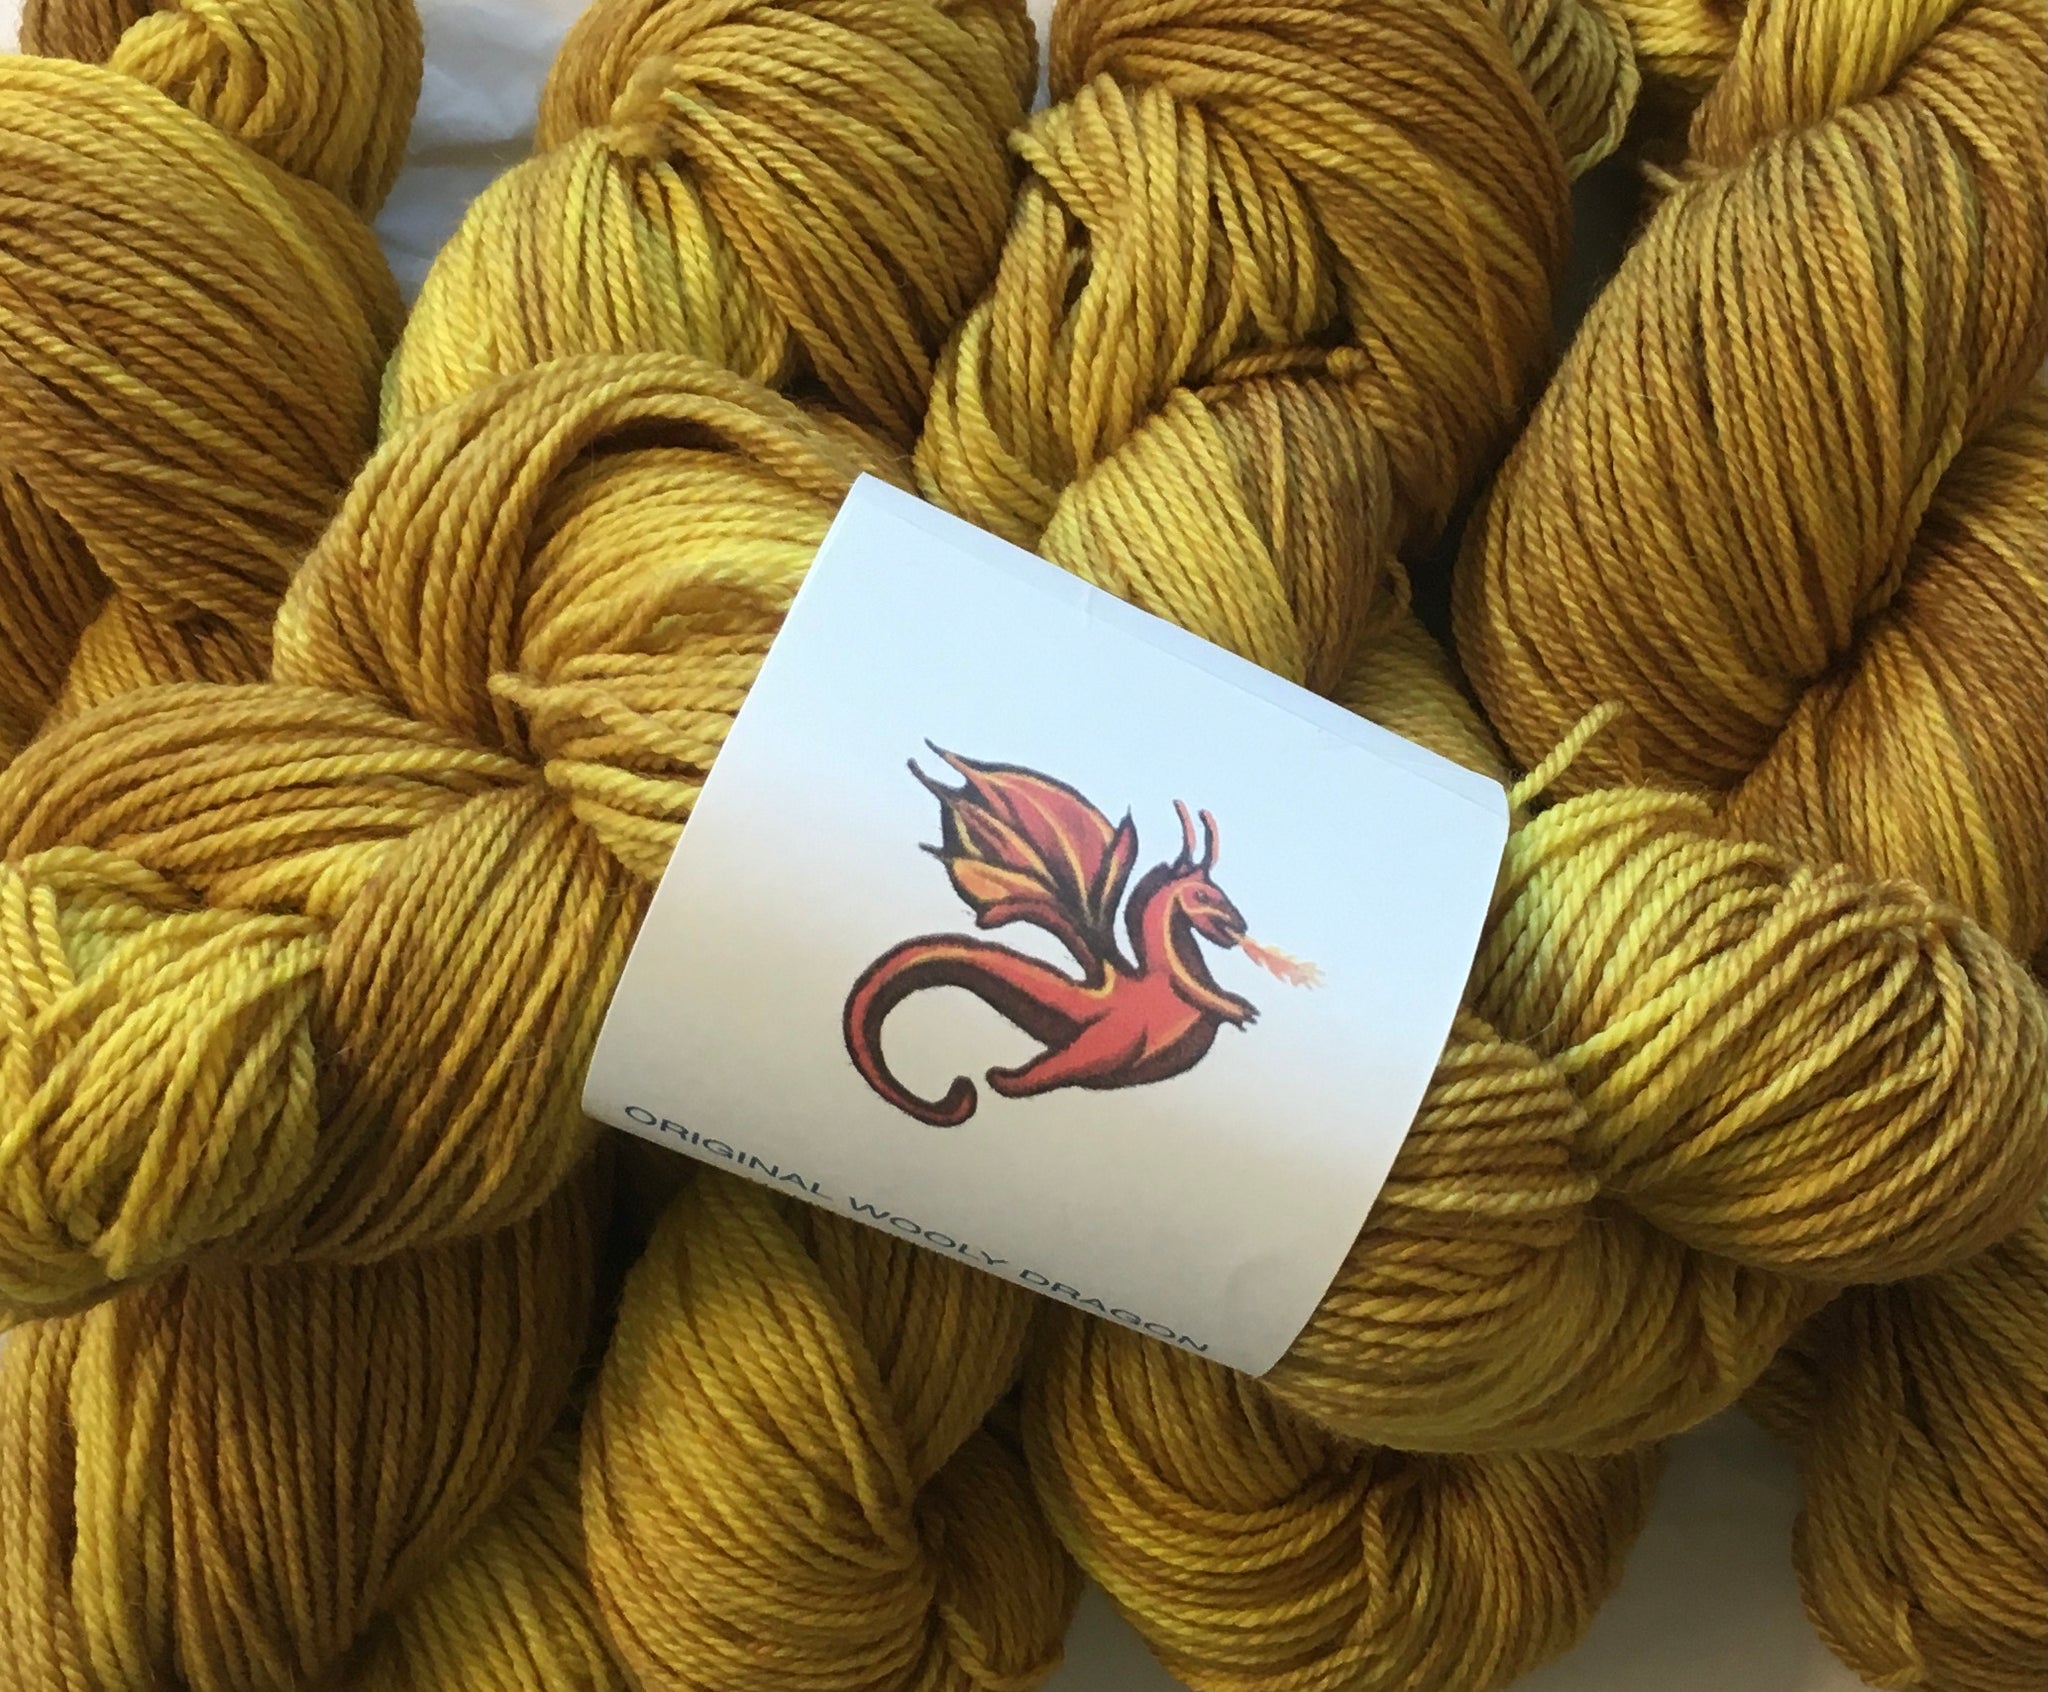 Bright Yellow Dyed Baby Soft Yarn, For Knitting